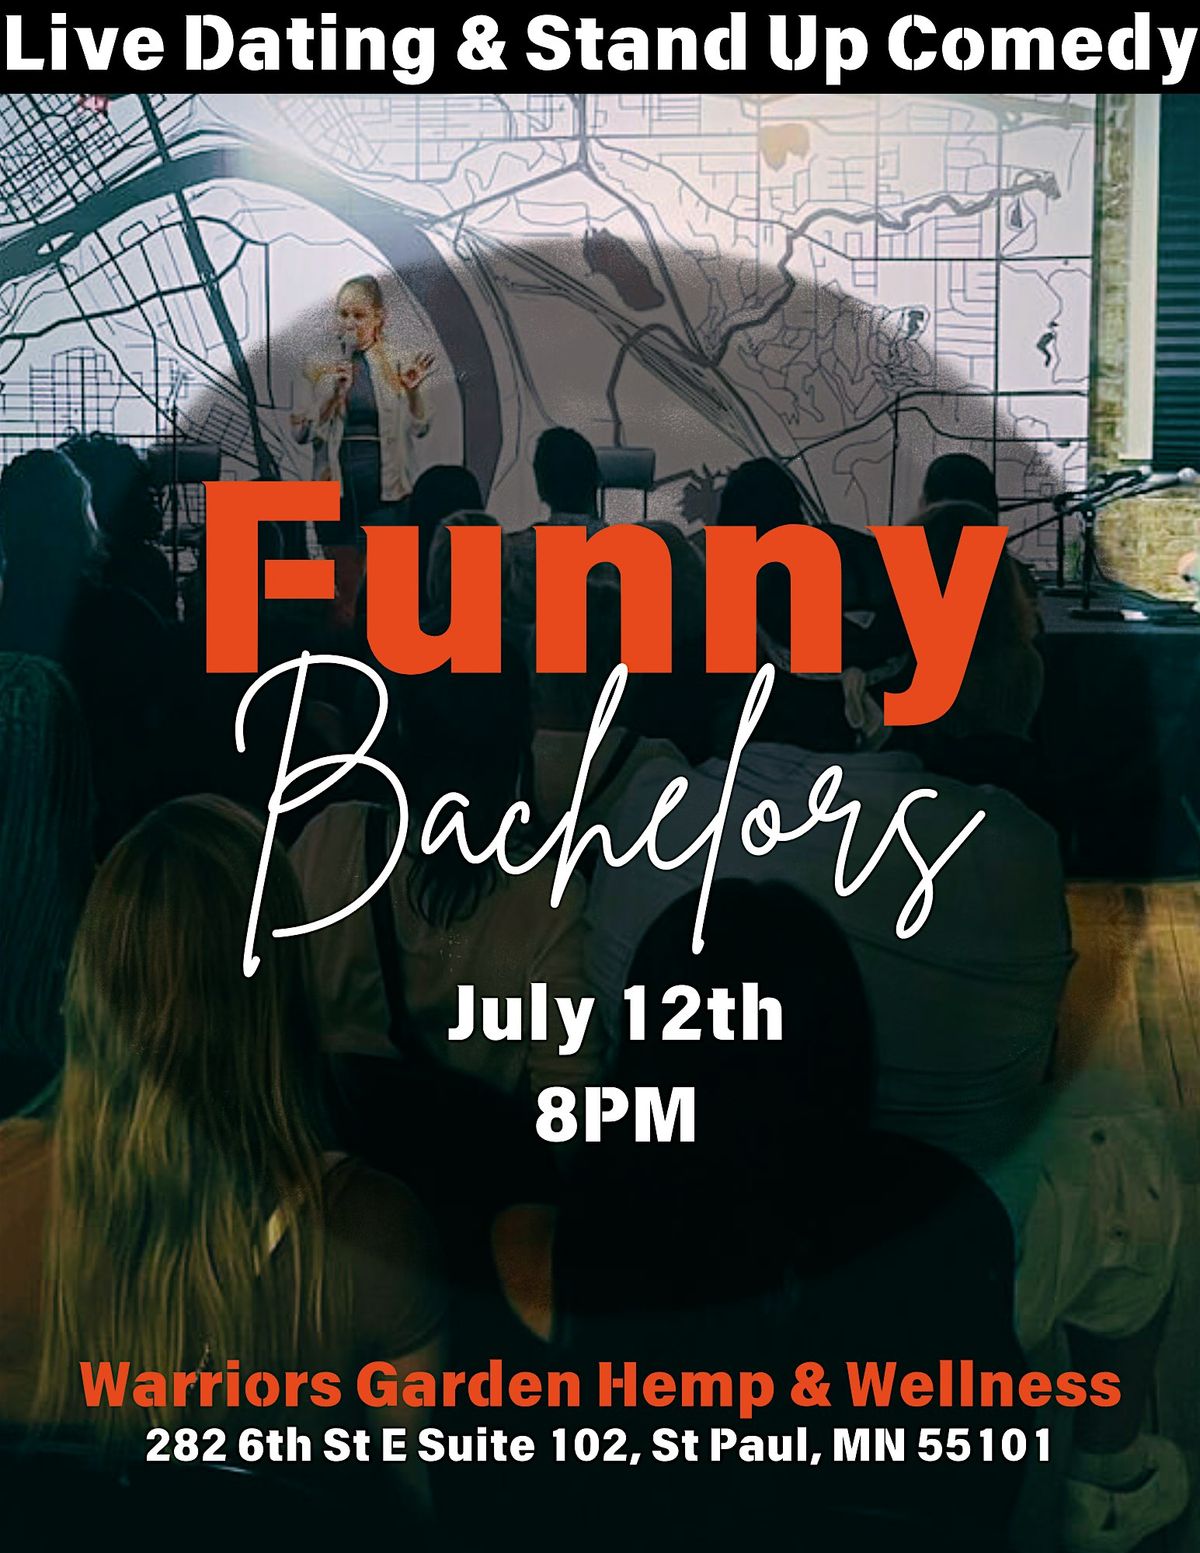 Funny Bachelors: Live Dating & Stand Up Comedy